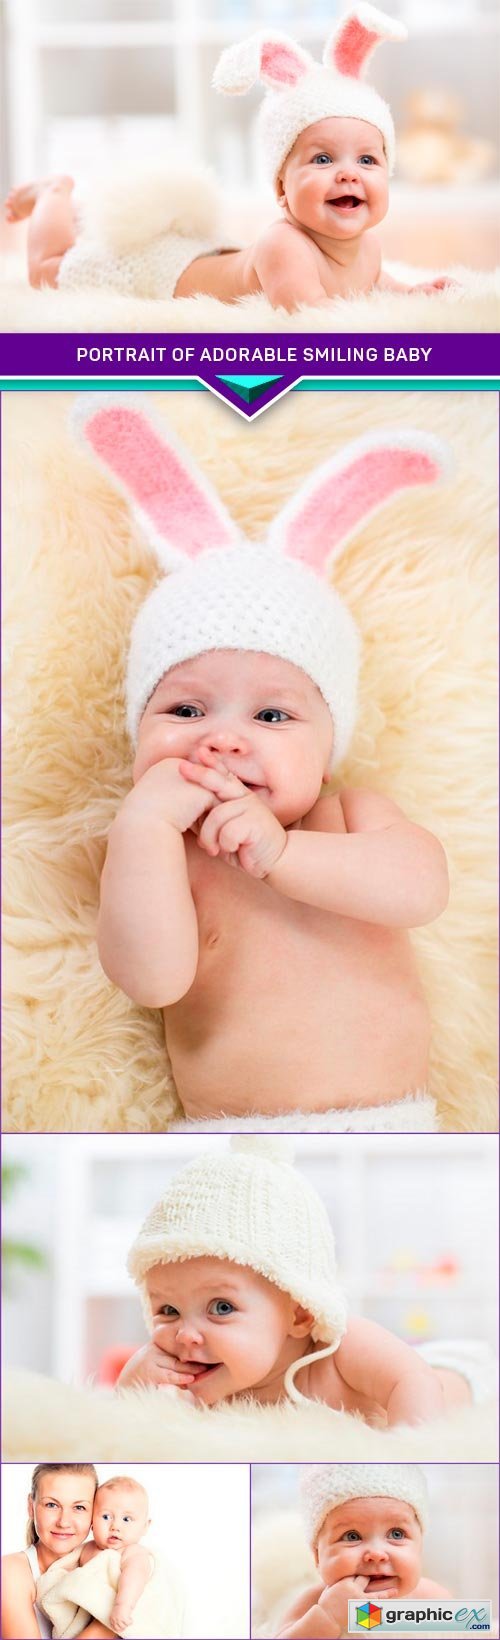 Portrait of adorable smiling baby 5x JPEG